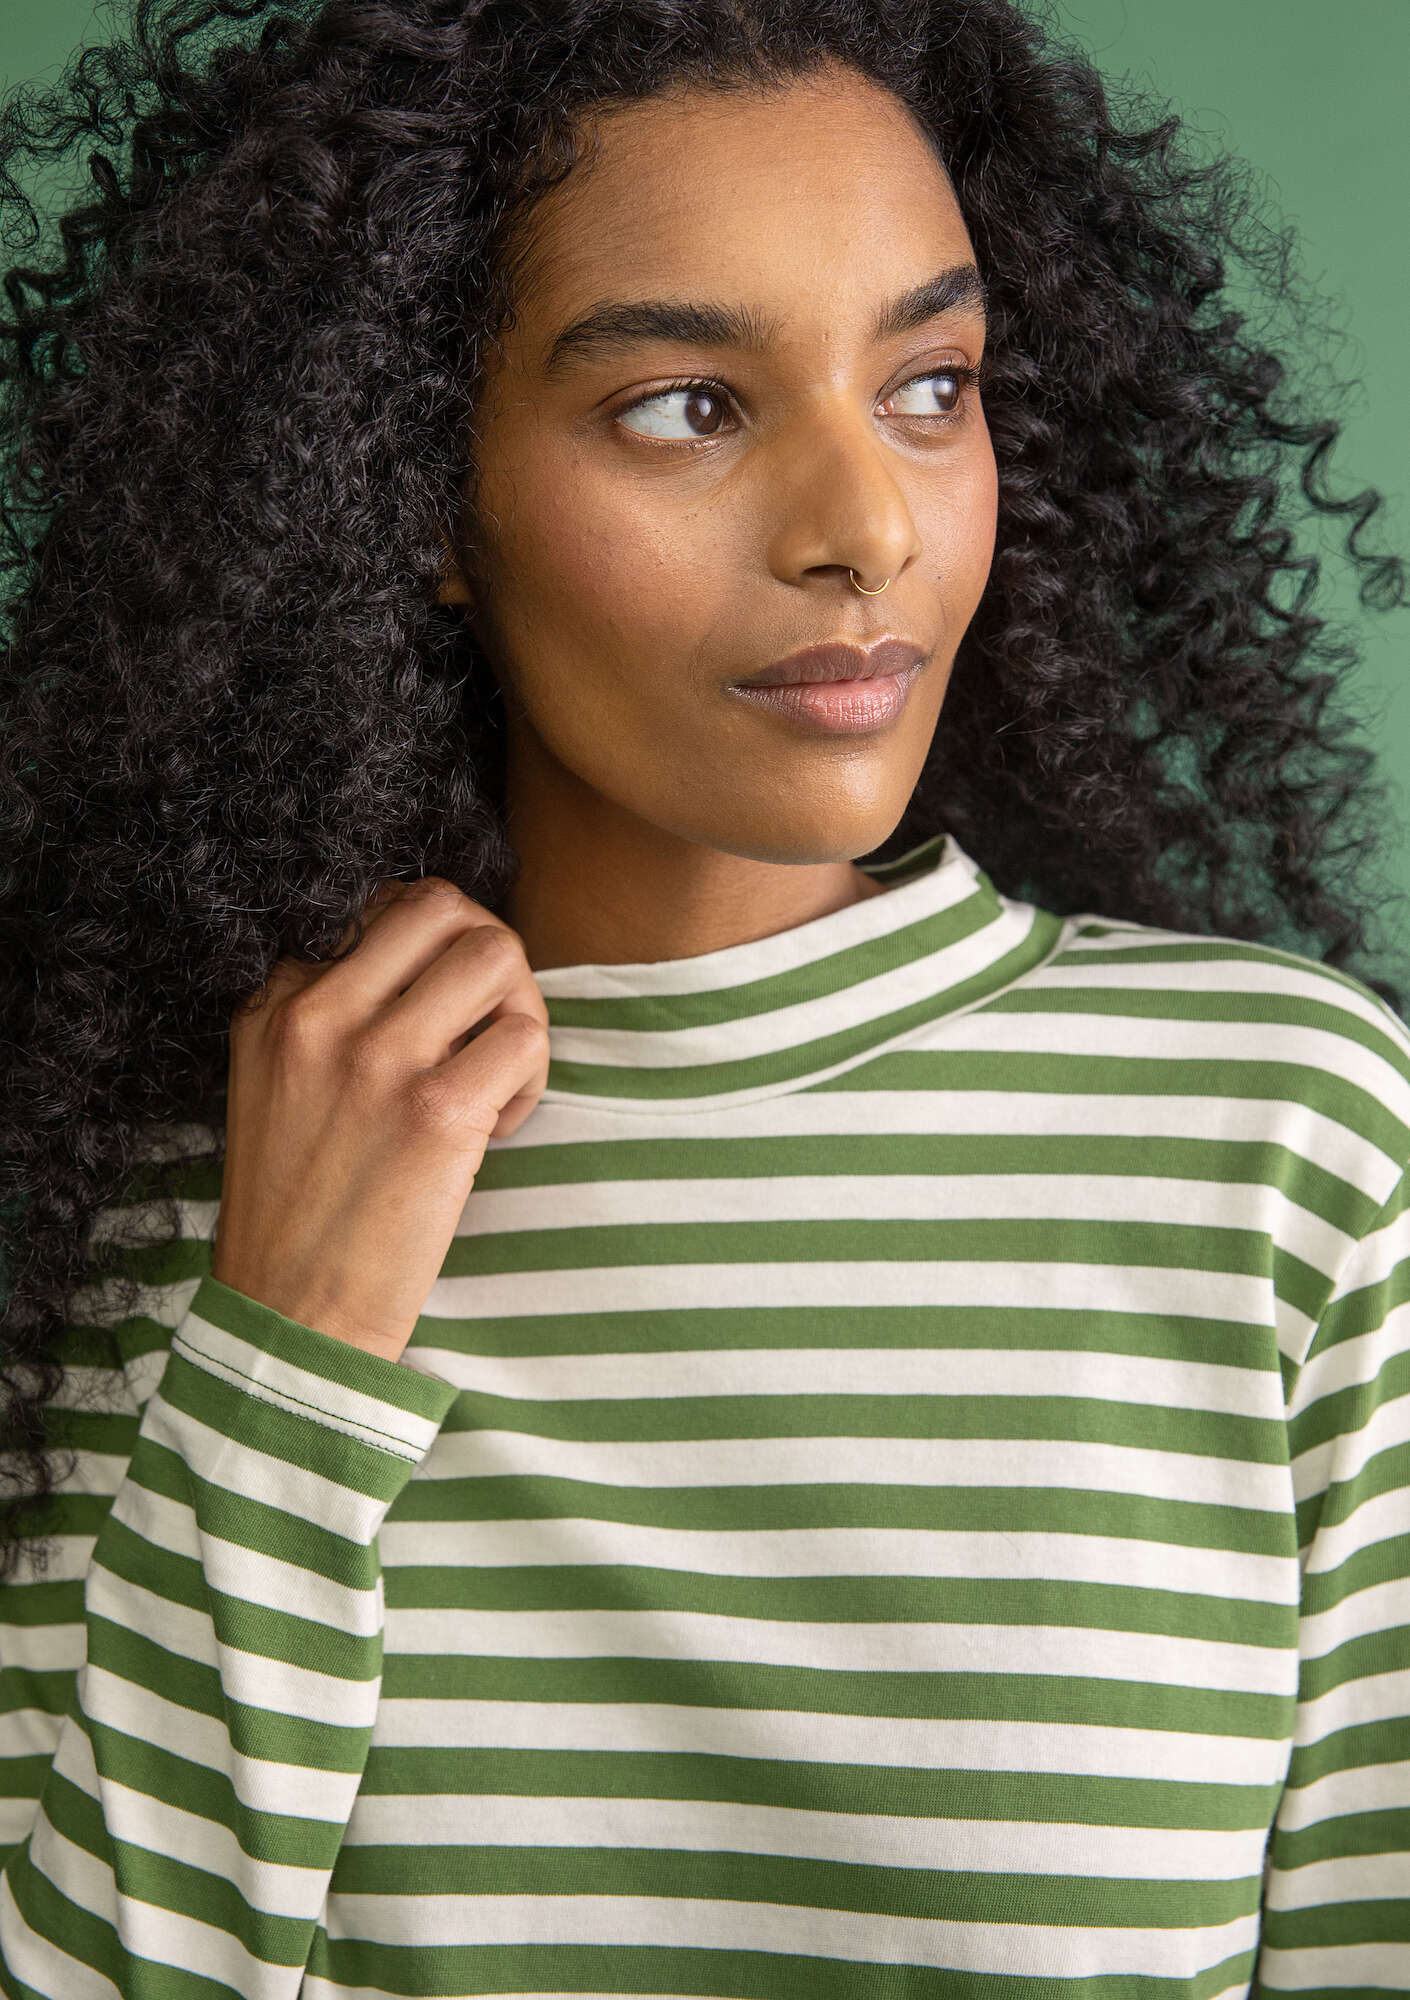 Striped mock turtleneck in organic cotton grass green/unbleached